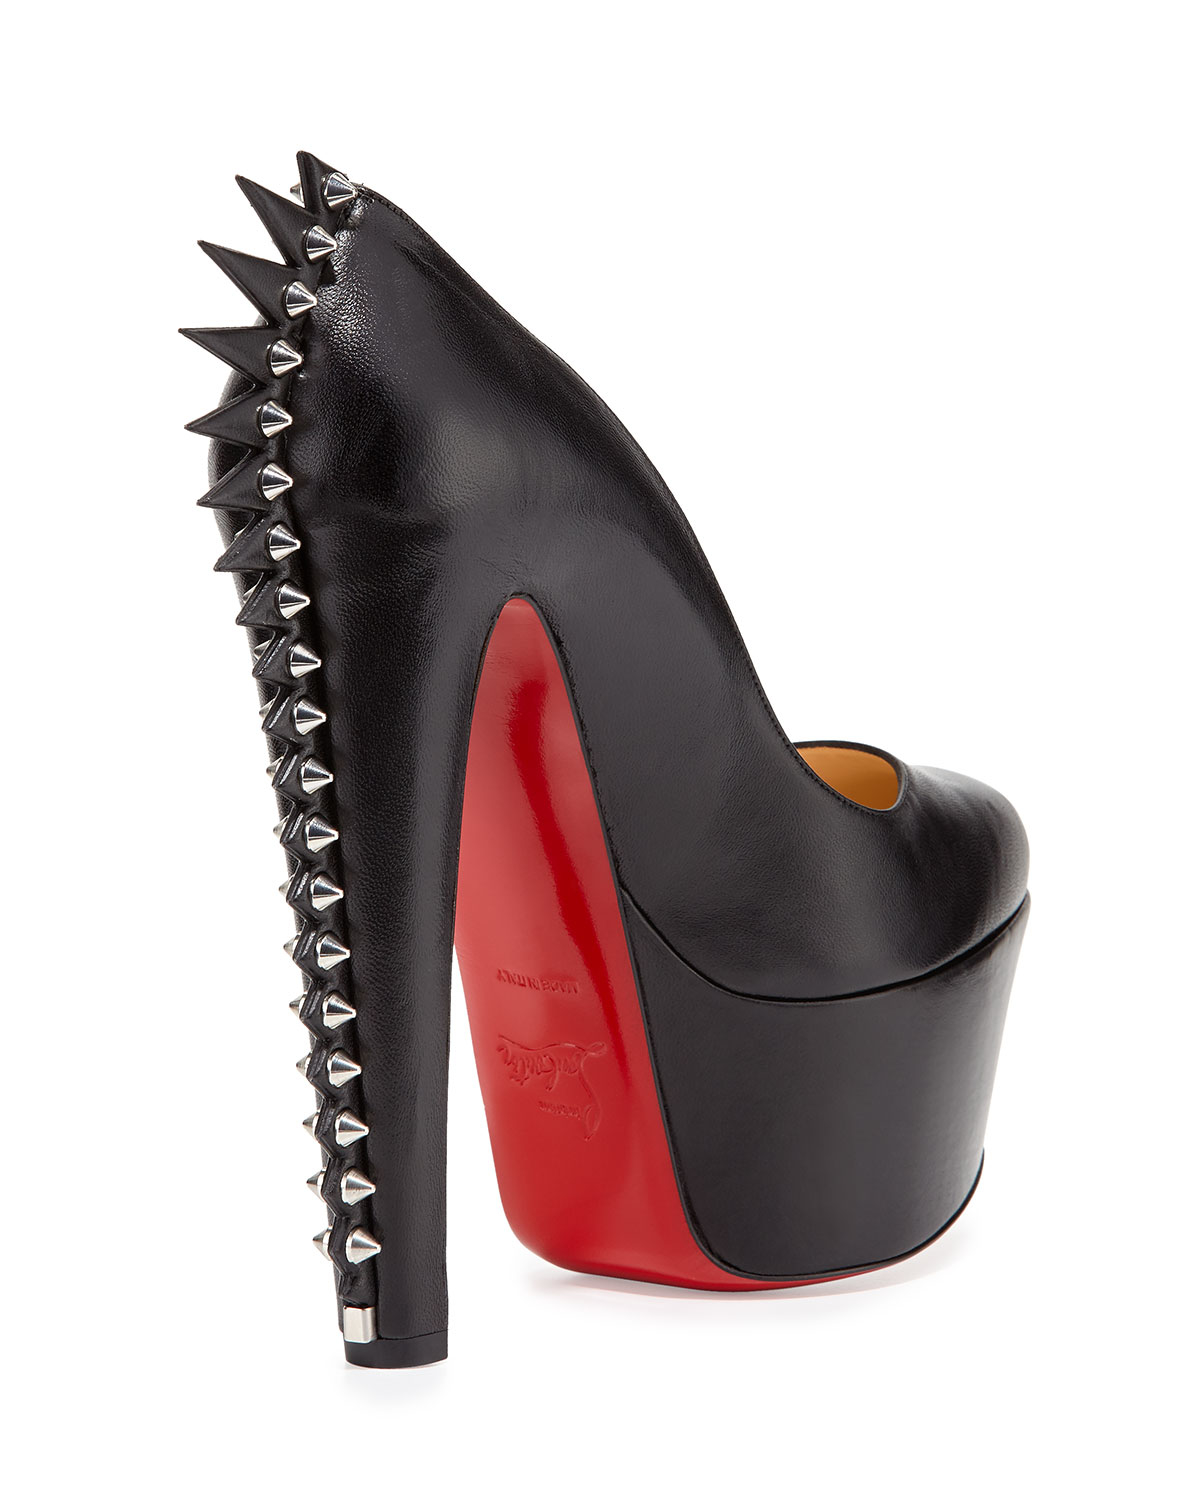 Lyst - Christian Louboutin Electropump Spiked Red Sole Pump in Black